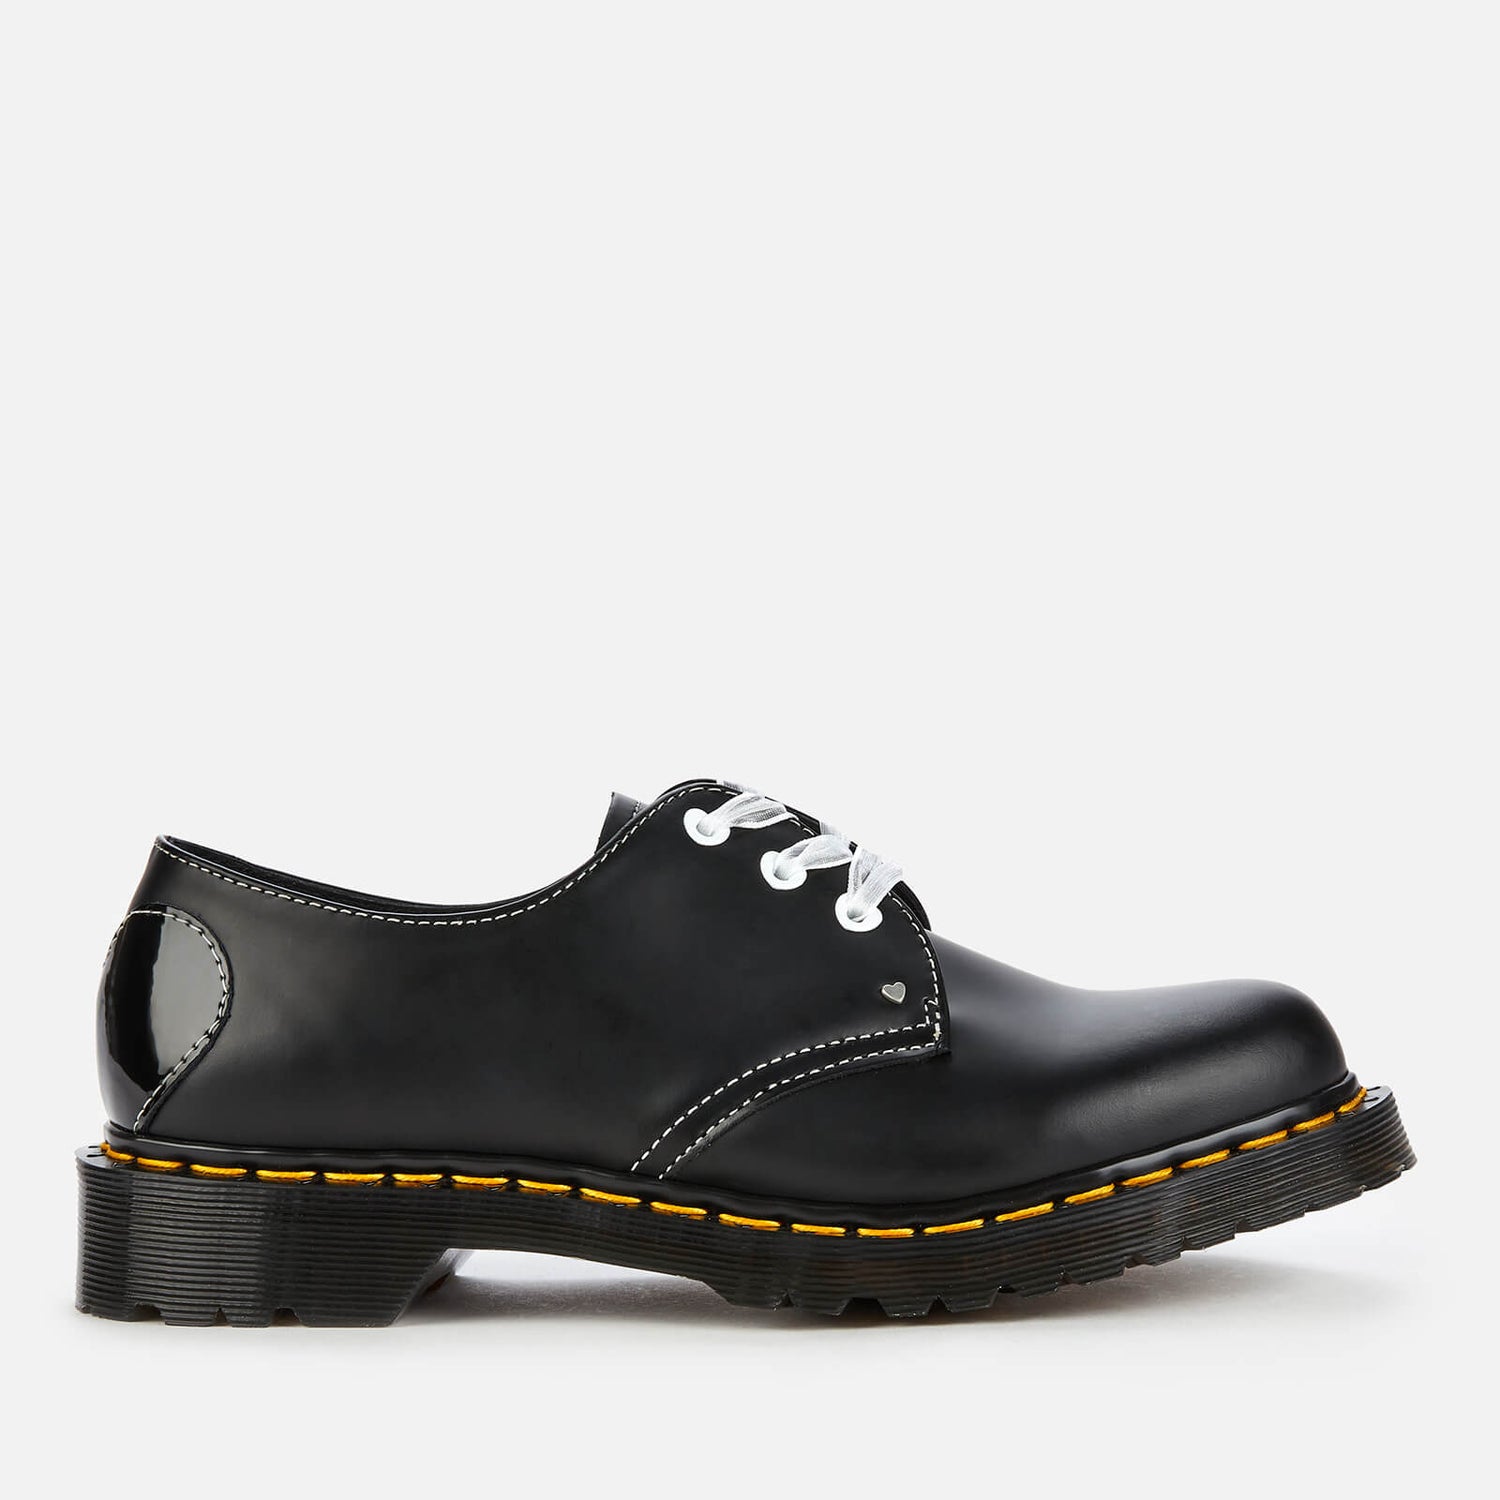 Dr. Martens Women's 1461 Hearts Smooth Leather 3-Eye Shoes - Black